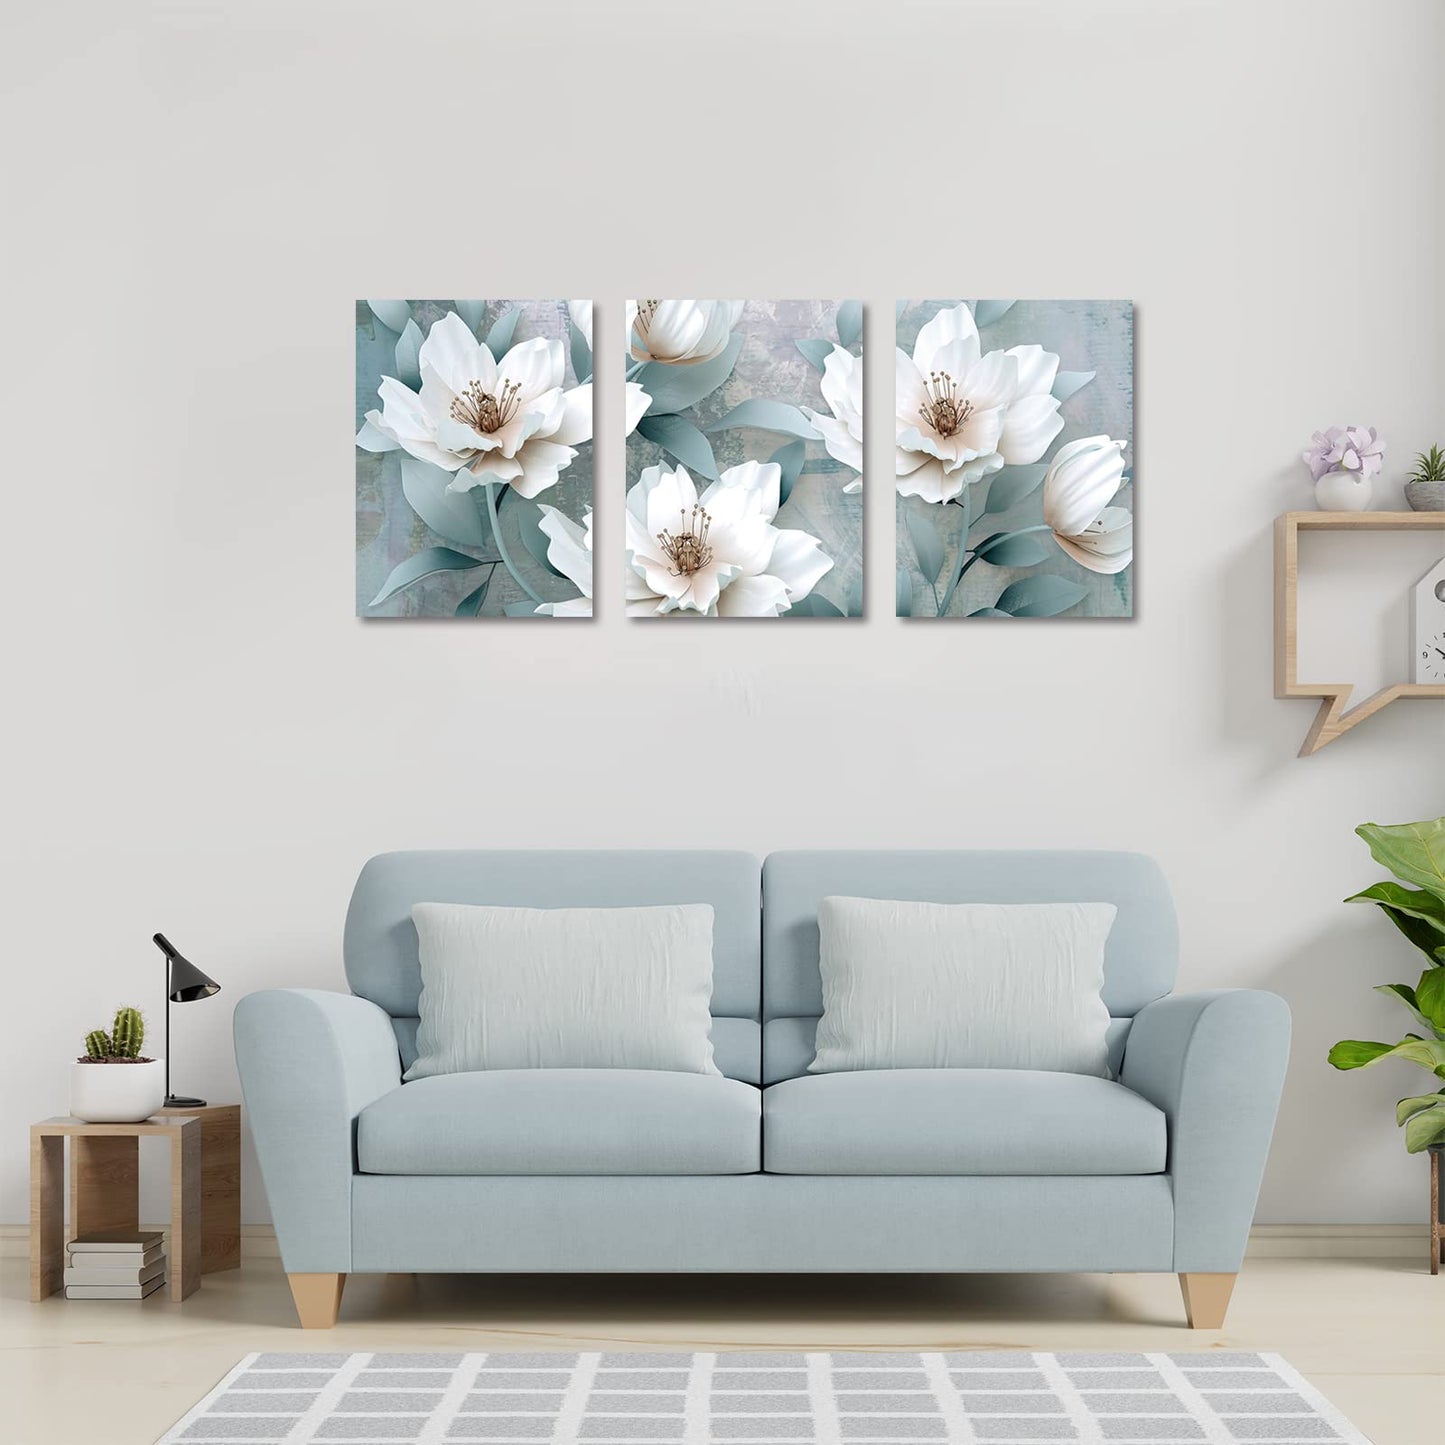 Floral Wall Art Botanical Prints & Posters Floral Canvas Wall Prints Flower Pictures Wall Decor for Living Room, Bathroom Bedroom Kitchen Bathroom Wall Decor, Unframed Set of 3, 12x16 inches